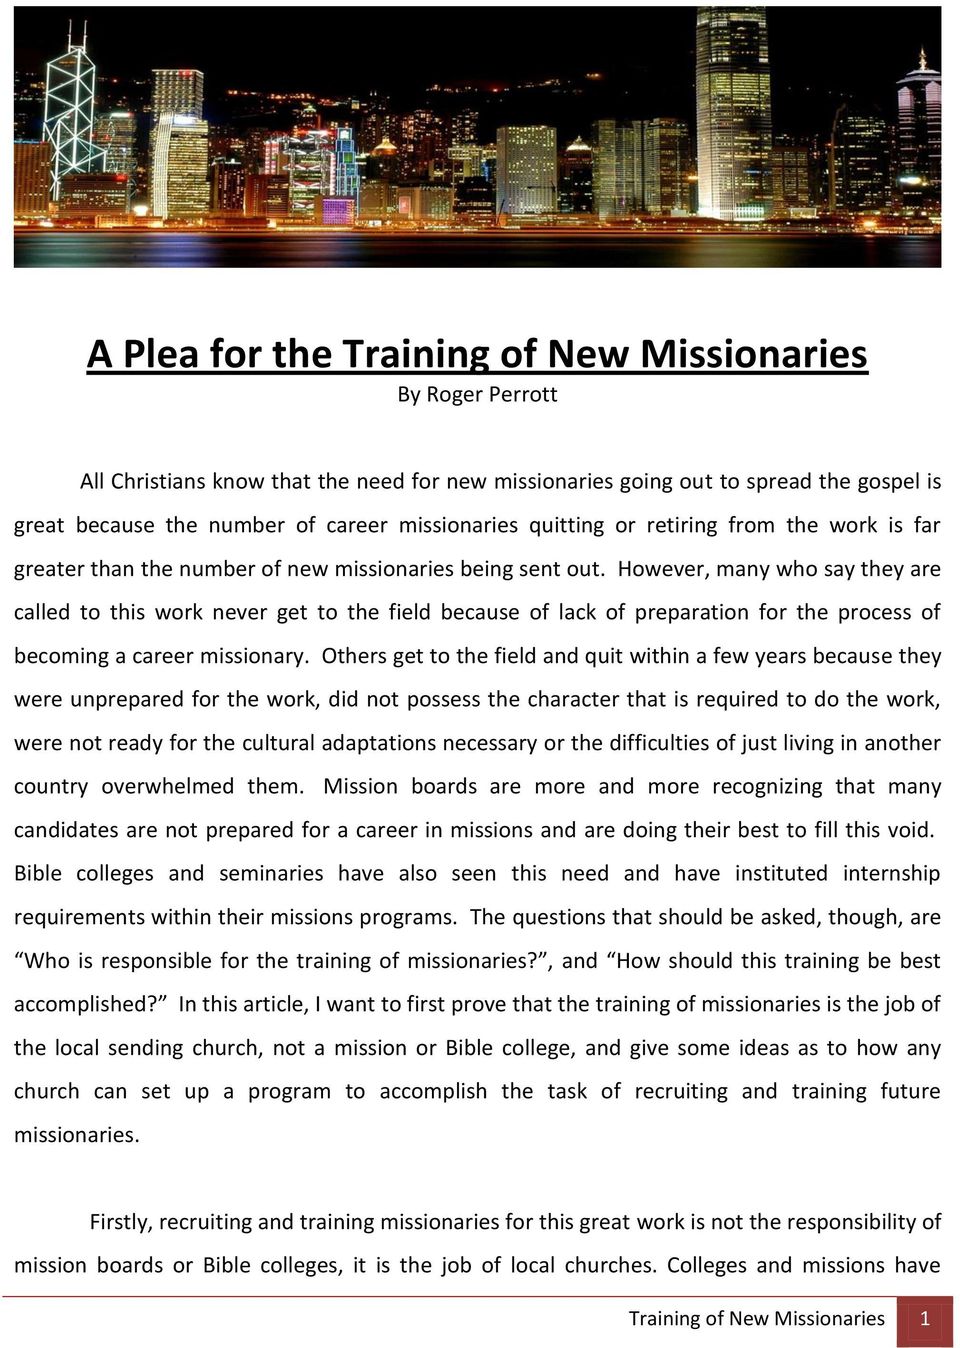 However, many who say they are called to this work never get to the field because of lack of preparation for the process of becoming a career missionary.